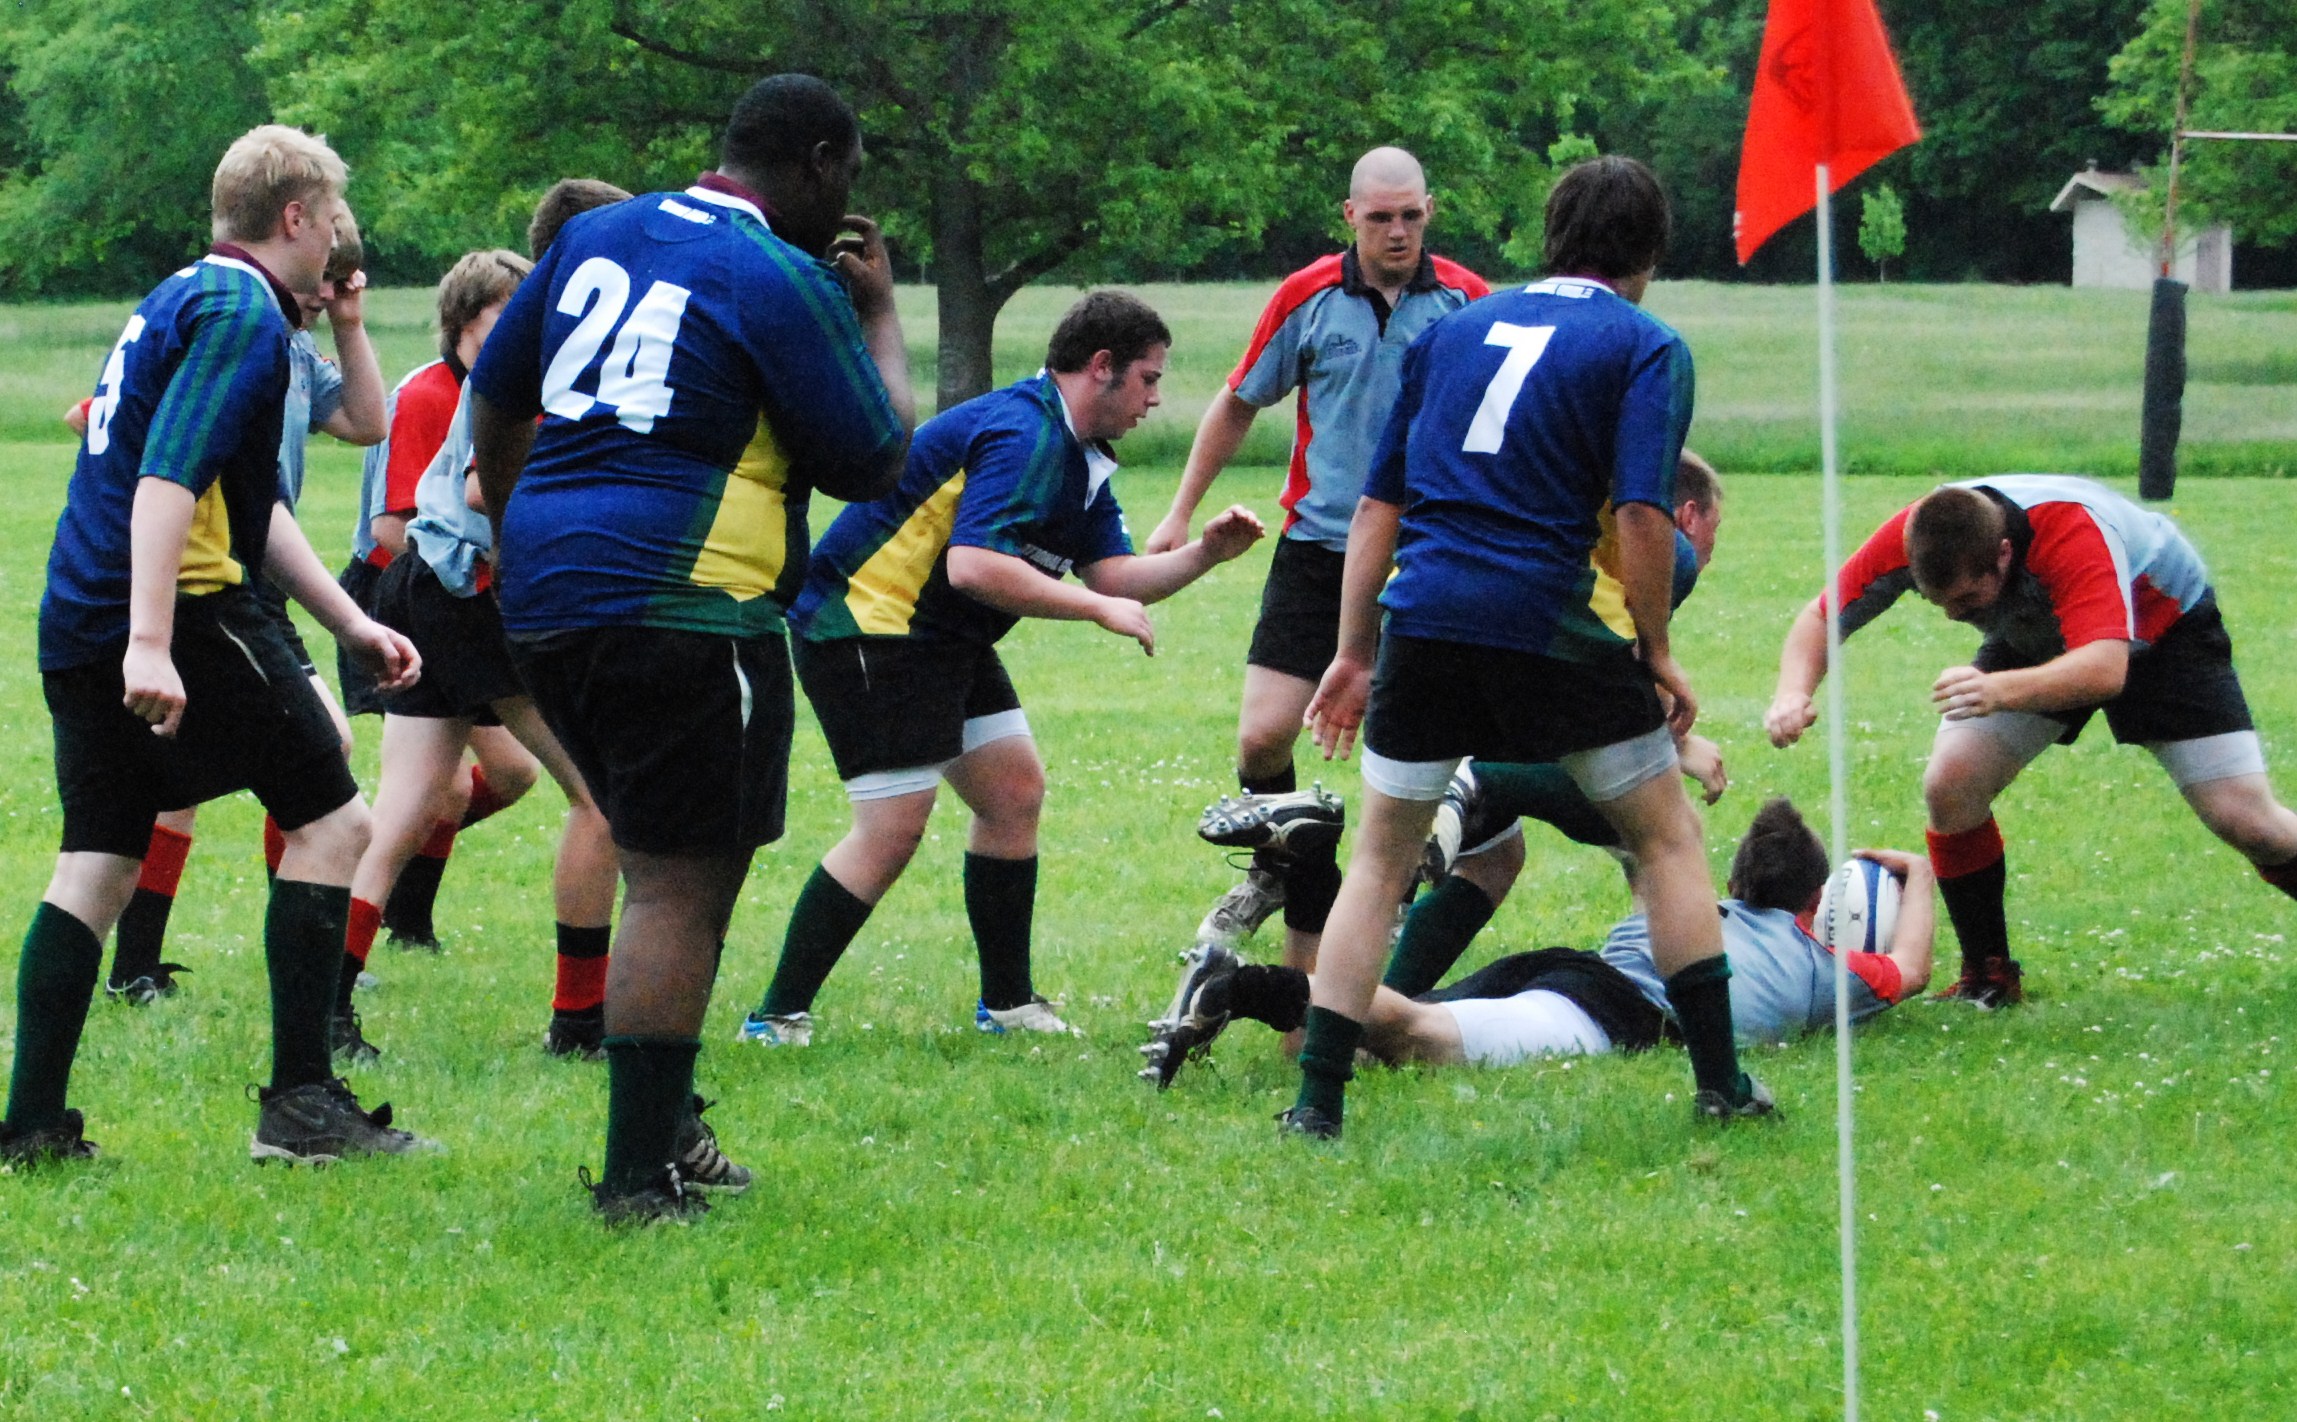 a group of people in uniforms are playing with a rugby ball